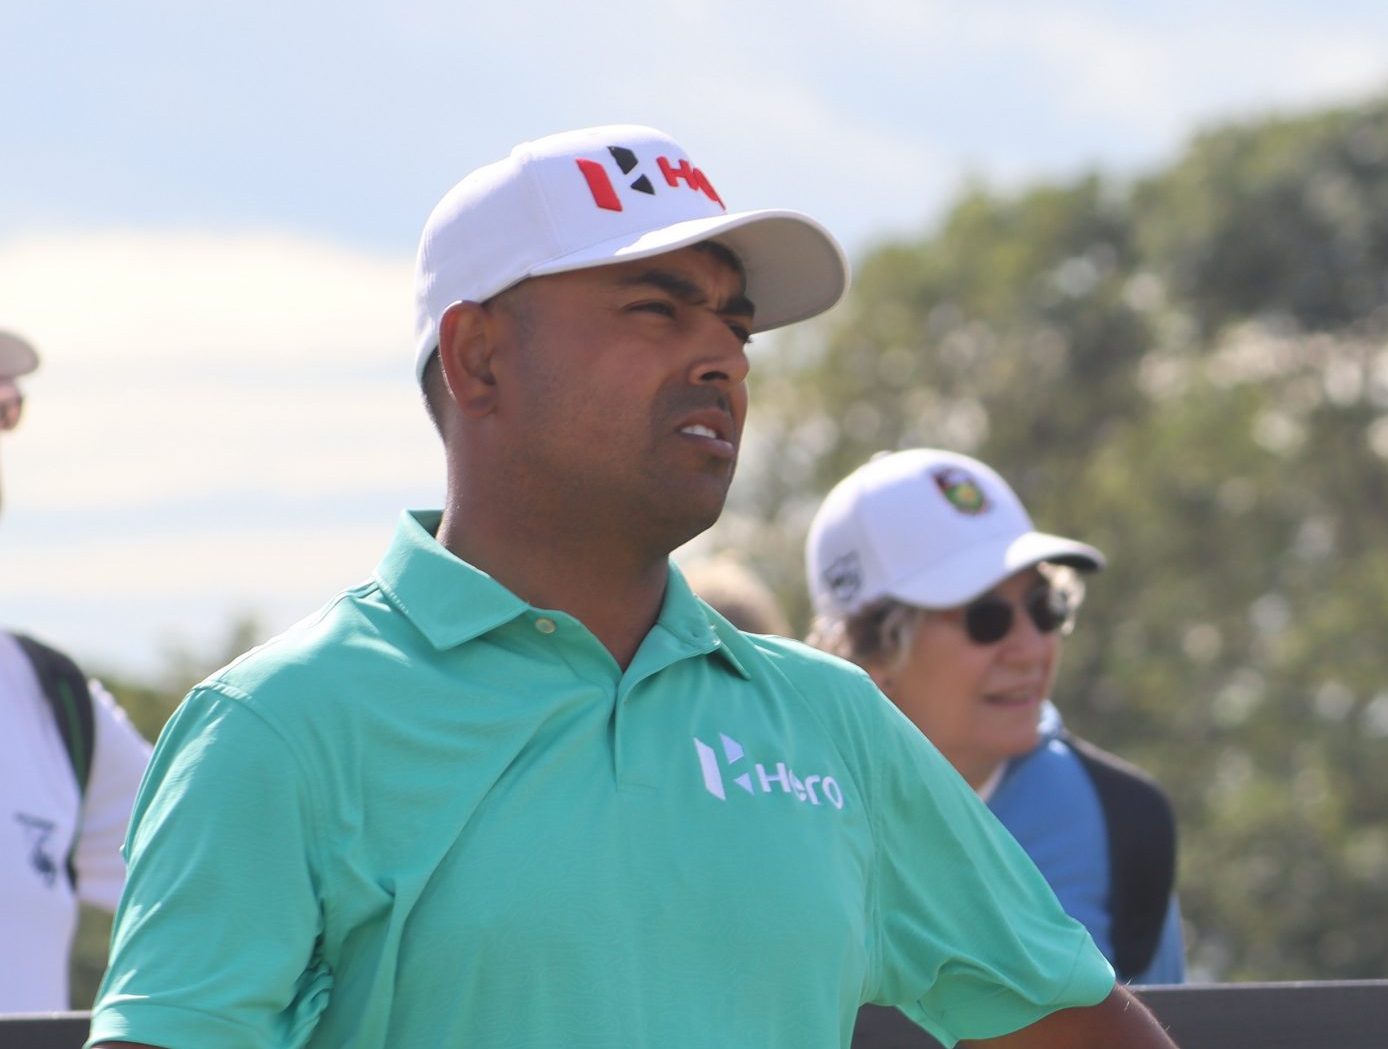 Lahiri misses cut, as do Scheffler, McIlroy and Spieth at St. Jude